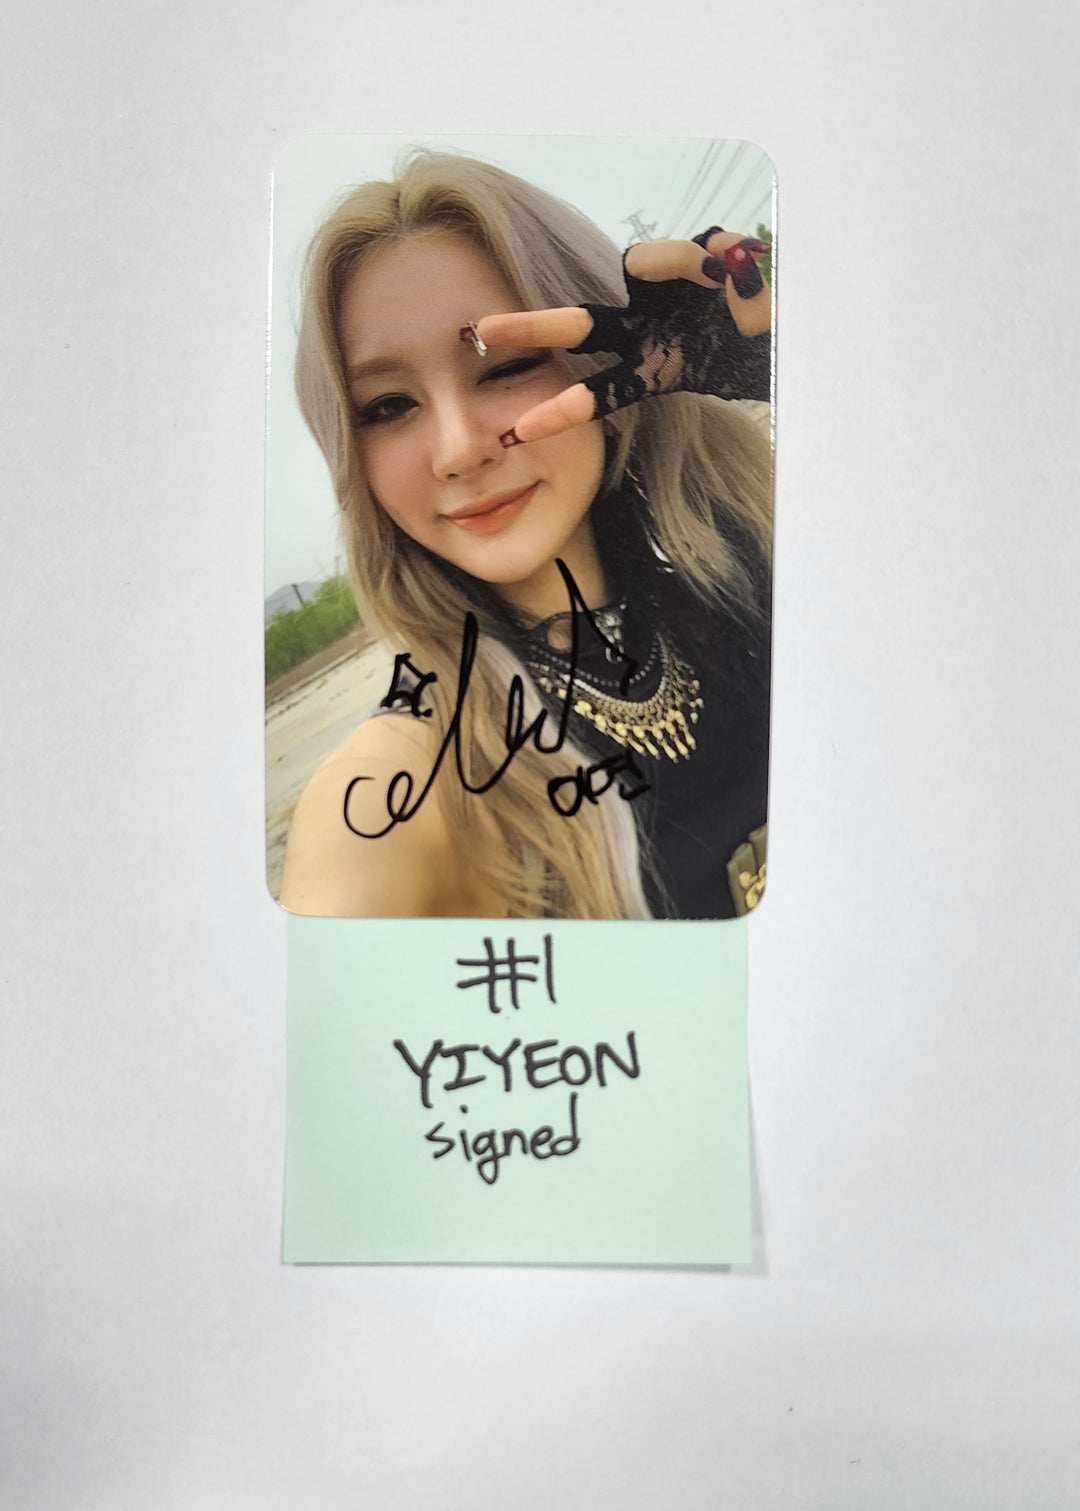 BVNDIT "Re-Original" - Apple Music Fansign Event Photocard - Must Read !